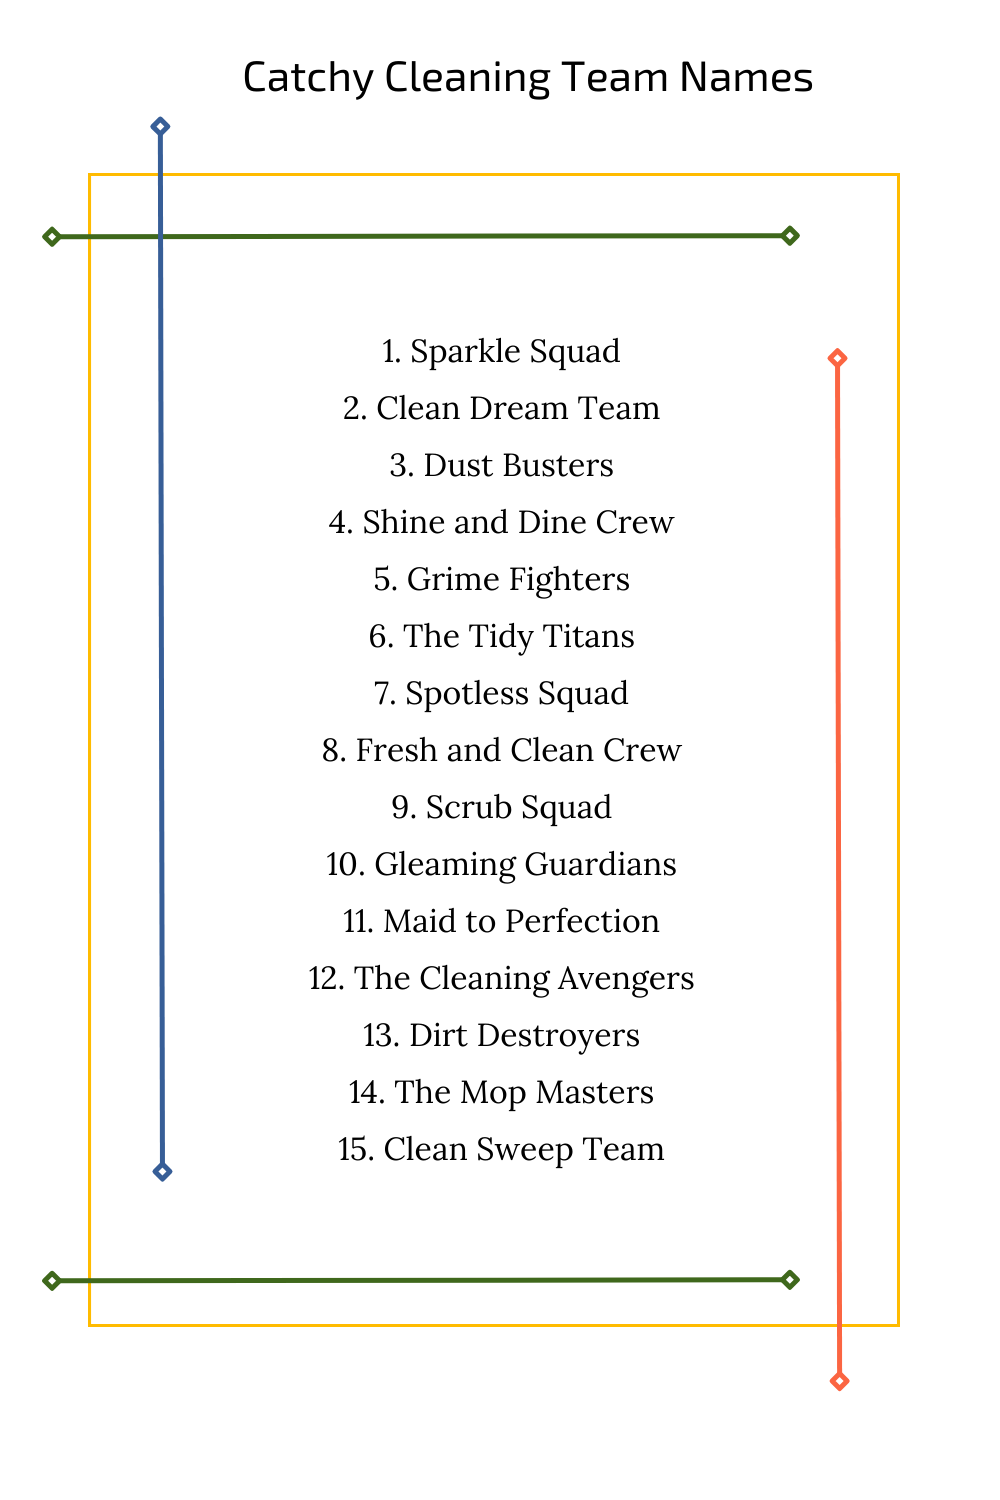 Catchy Cleaning Team Names